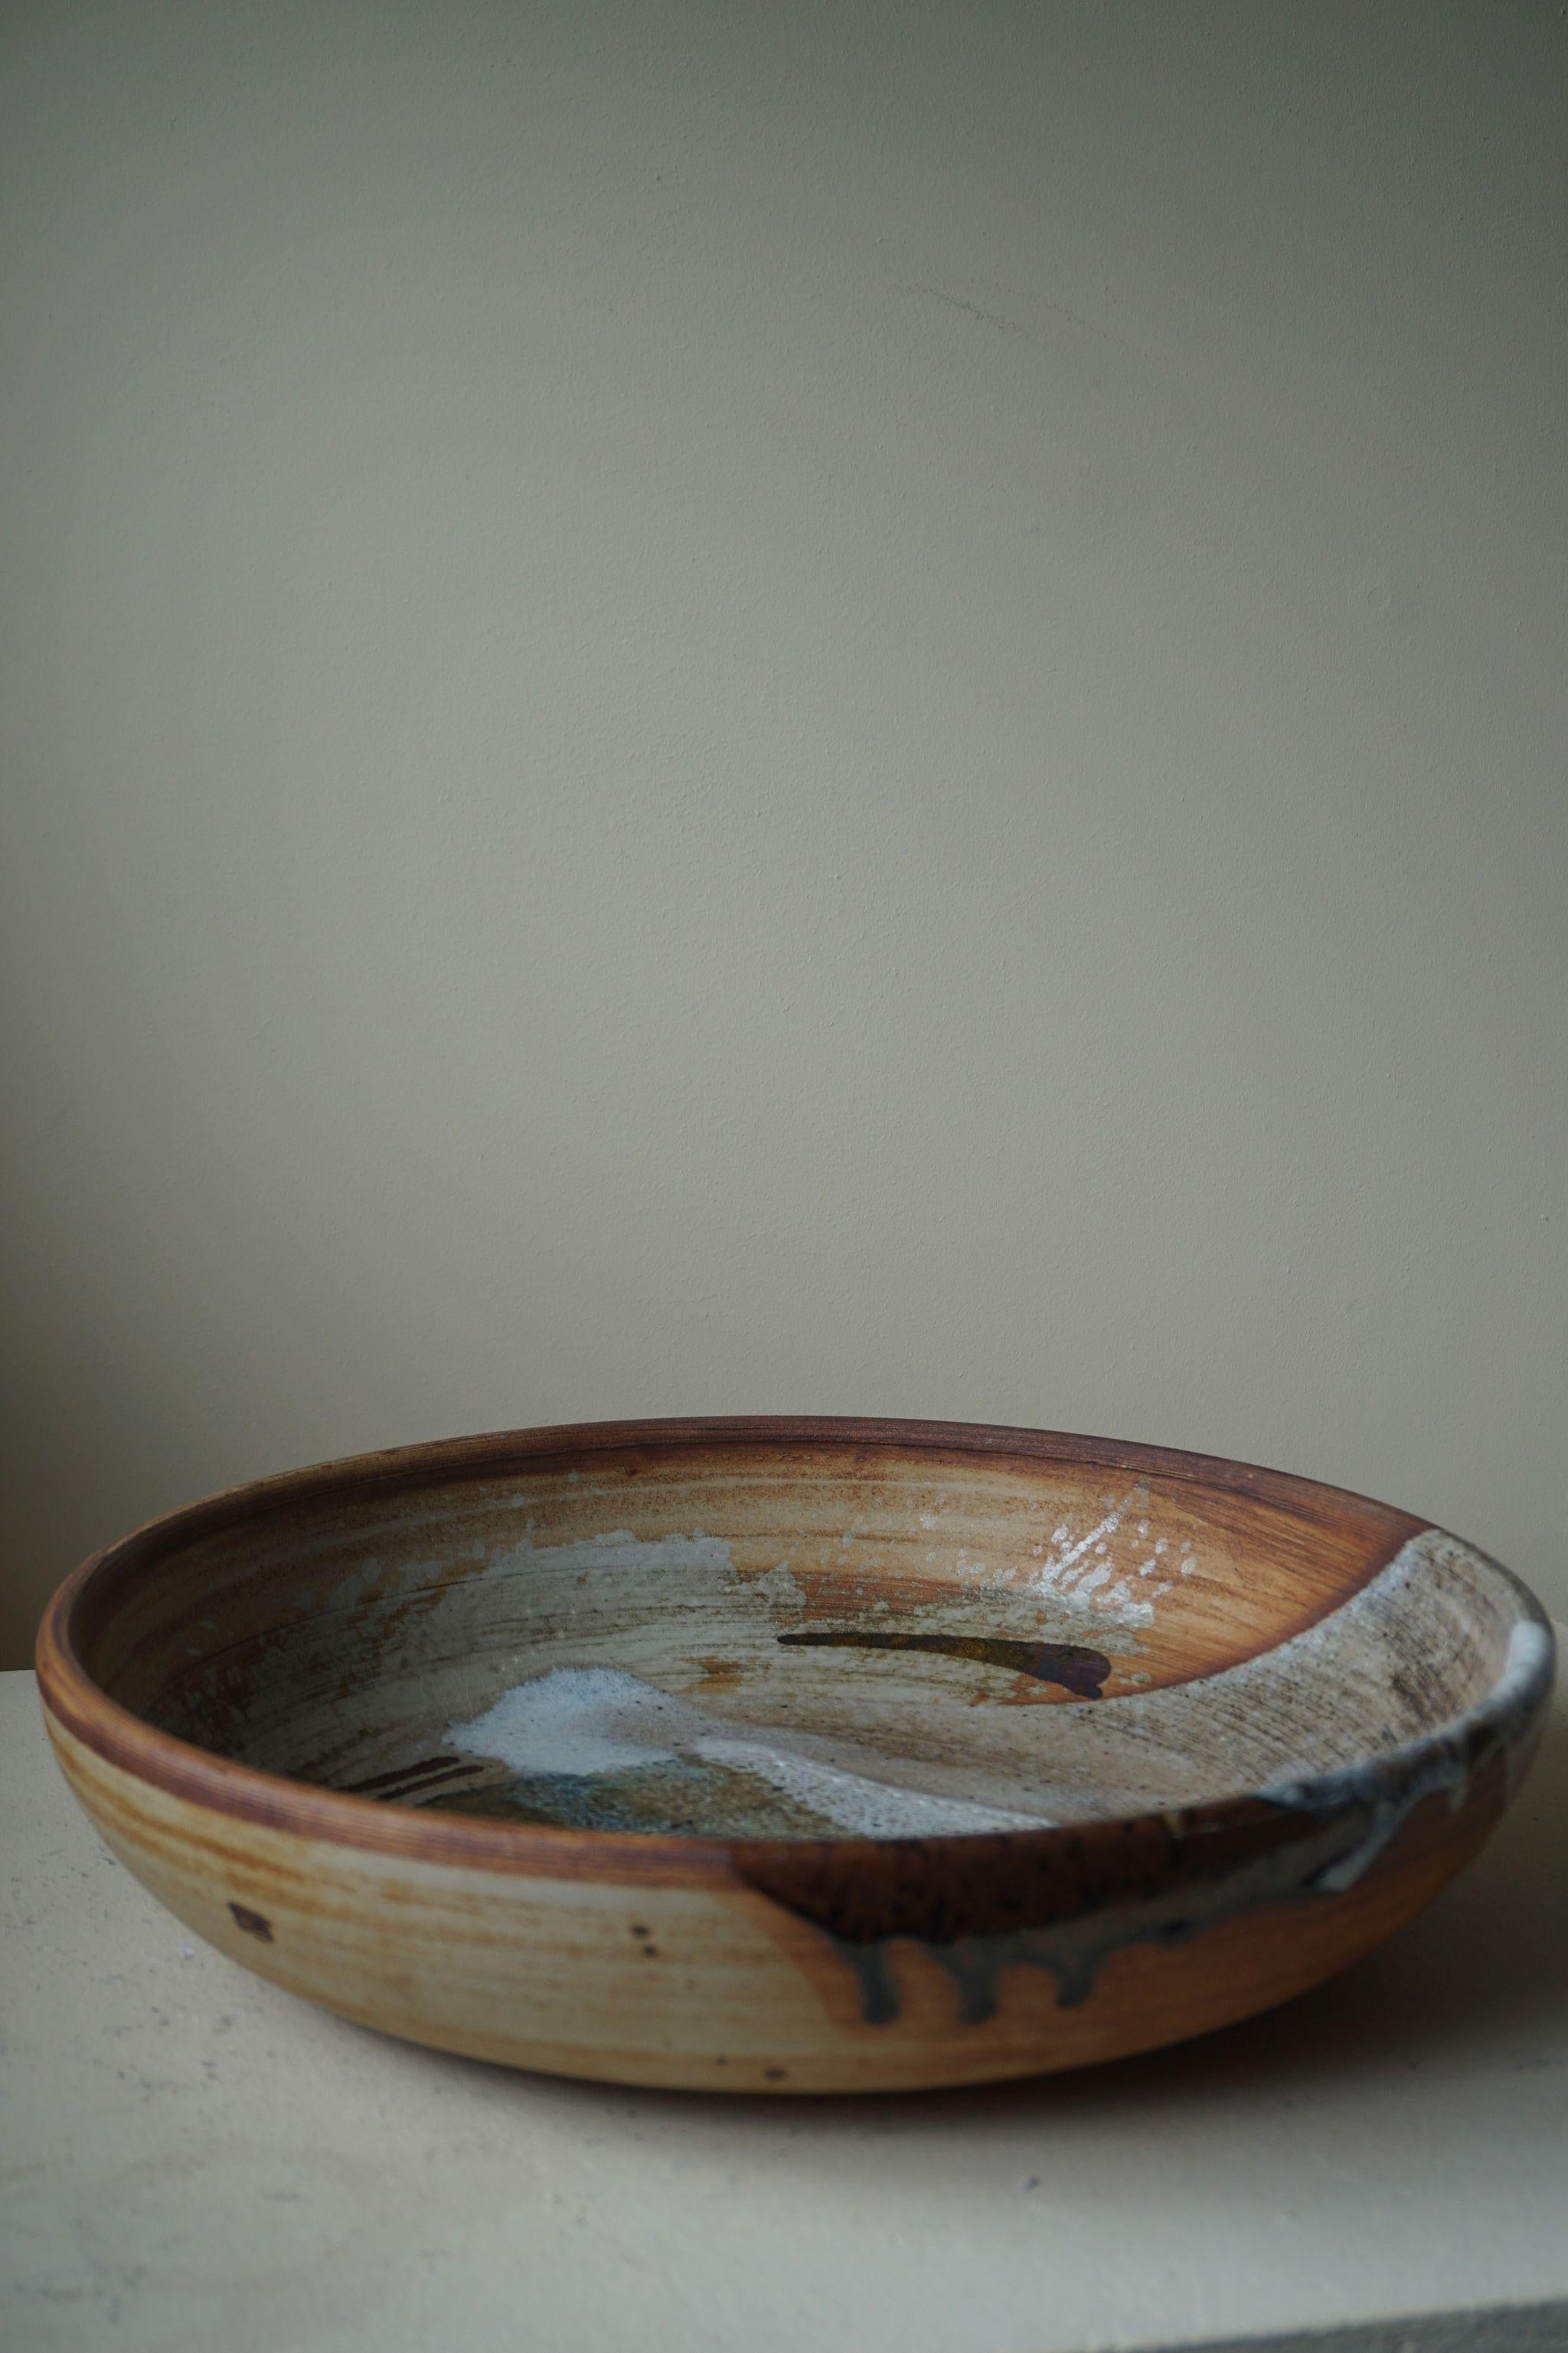 Beautiful large stoneware bowl by Danish artist Conny Walther. Made in 1970s.
Great colour plate in this glaze.

Other mentionable ceramic artists from Denmark: Arne Bang, Axel Salto & Gertrud Vasegaard.